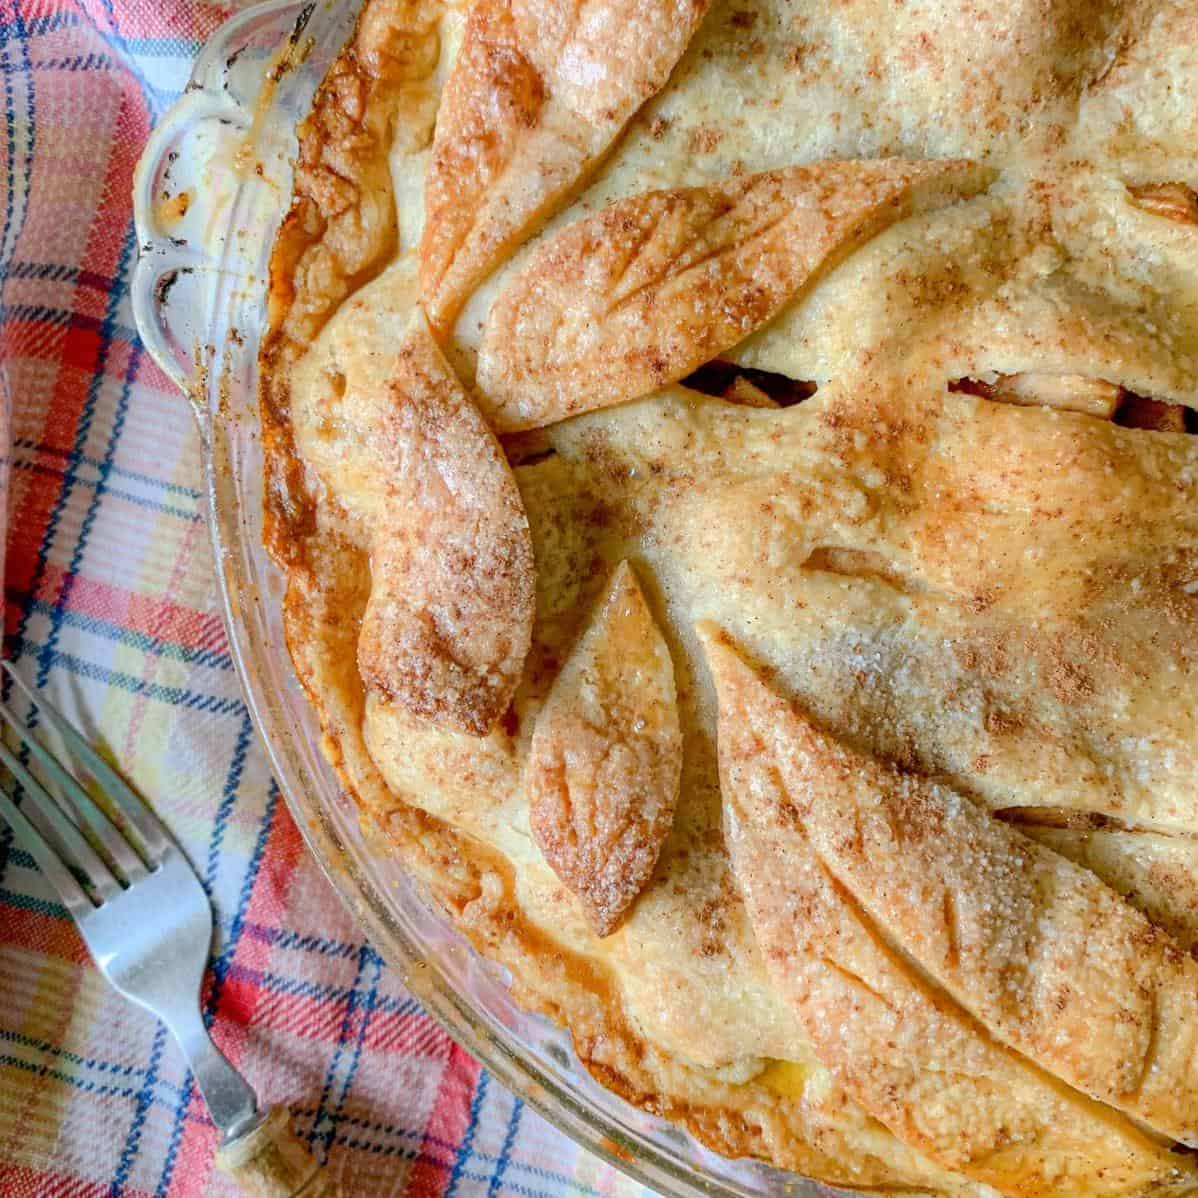  The perfect combination of flaky crust and sweet apples